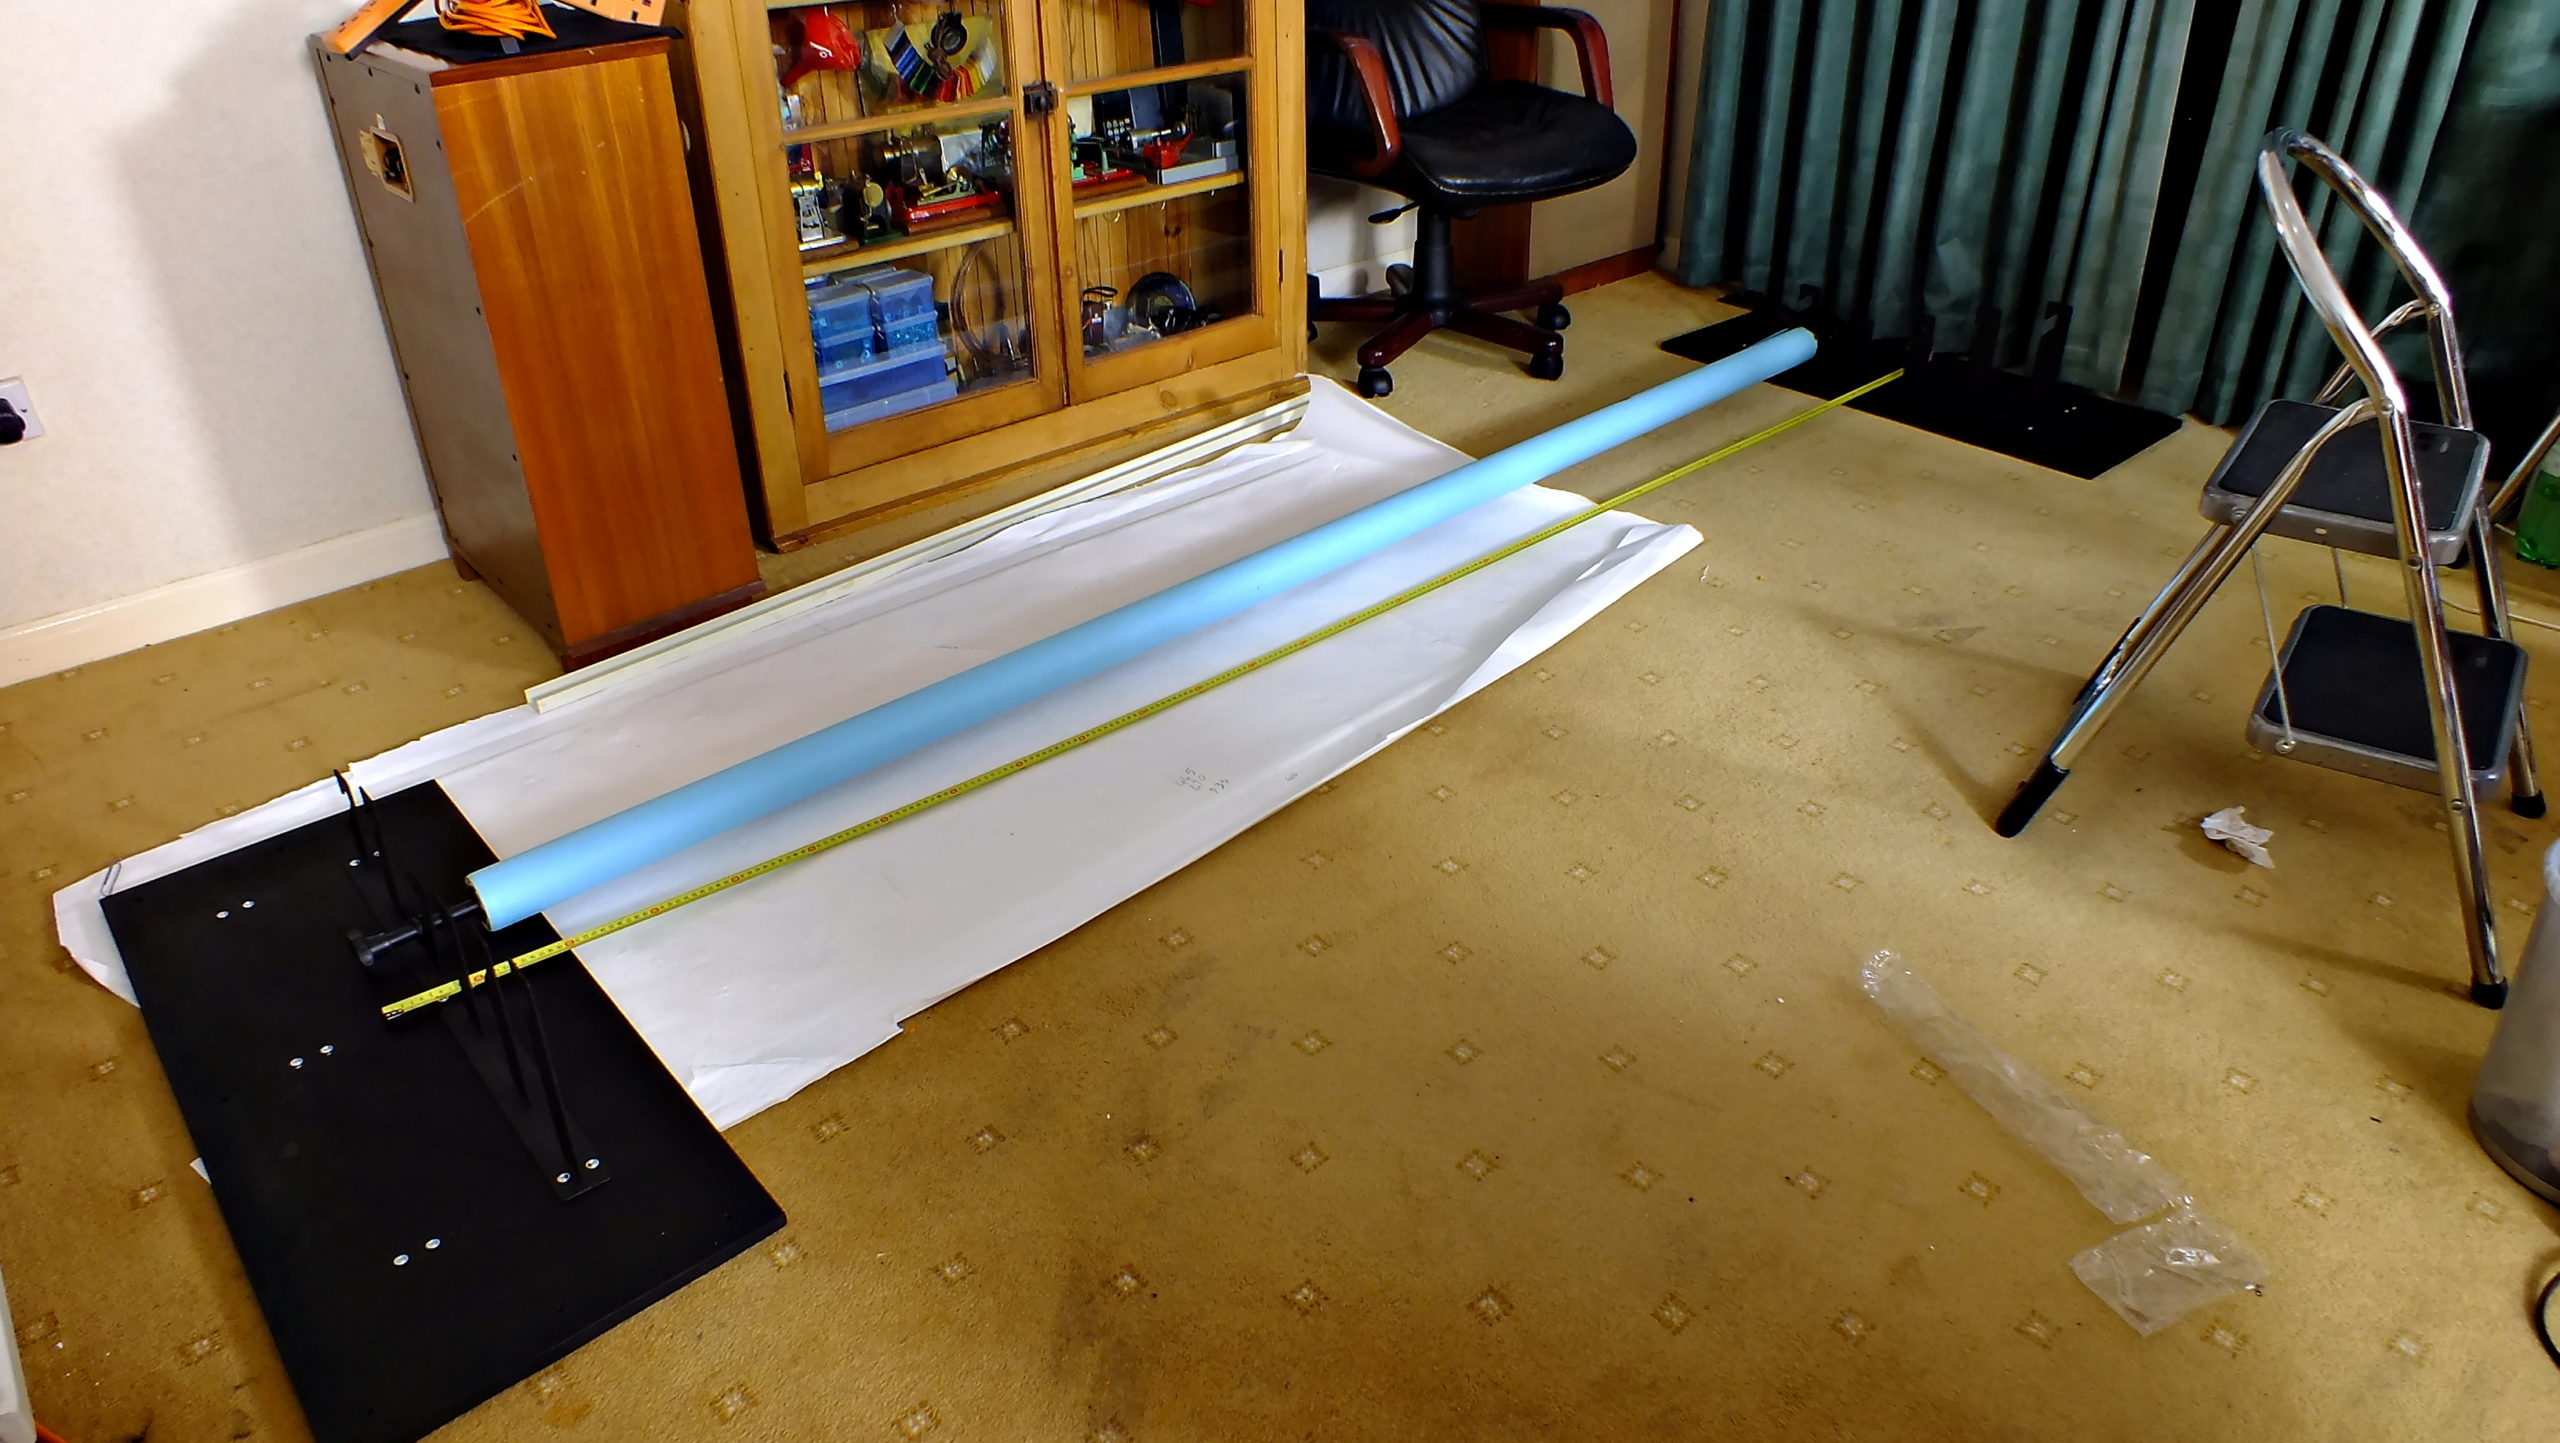 Measuring and calculating the exact distance required between plates in order to accommodate an actual 2.72 metre paper roll.